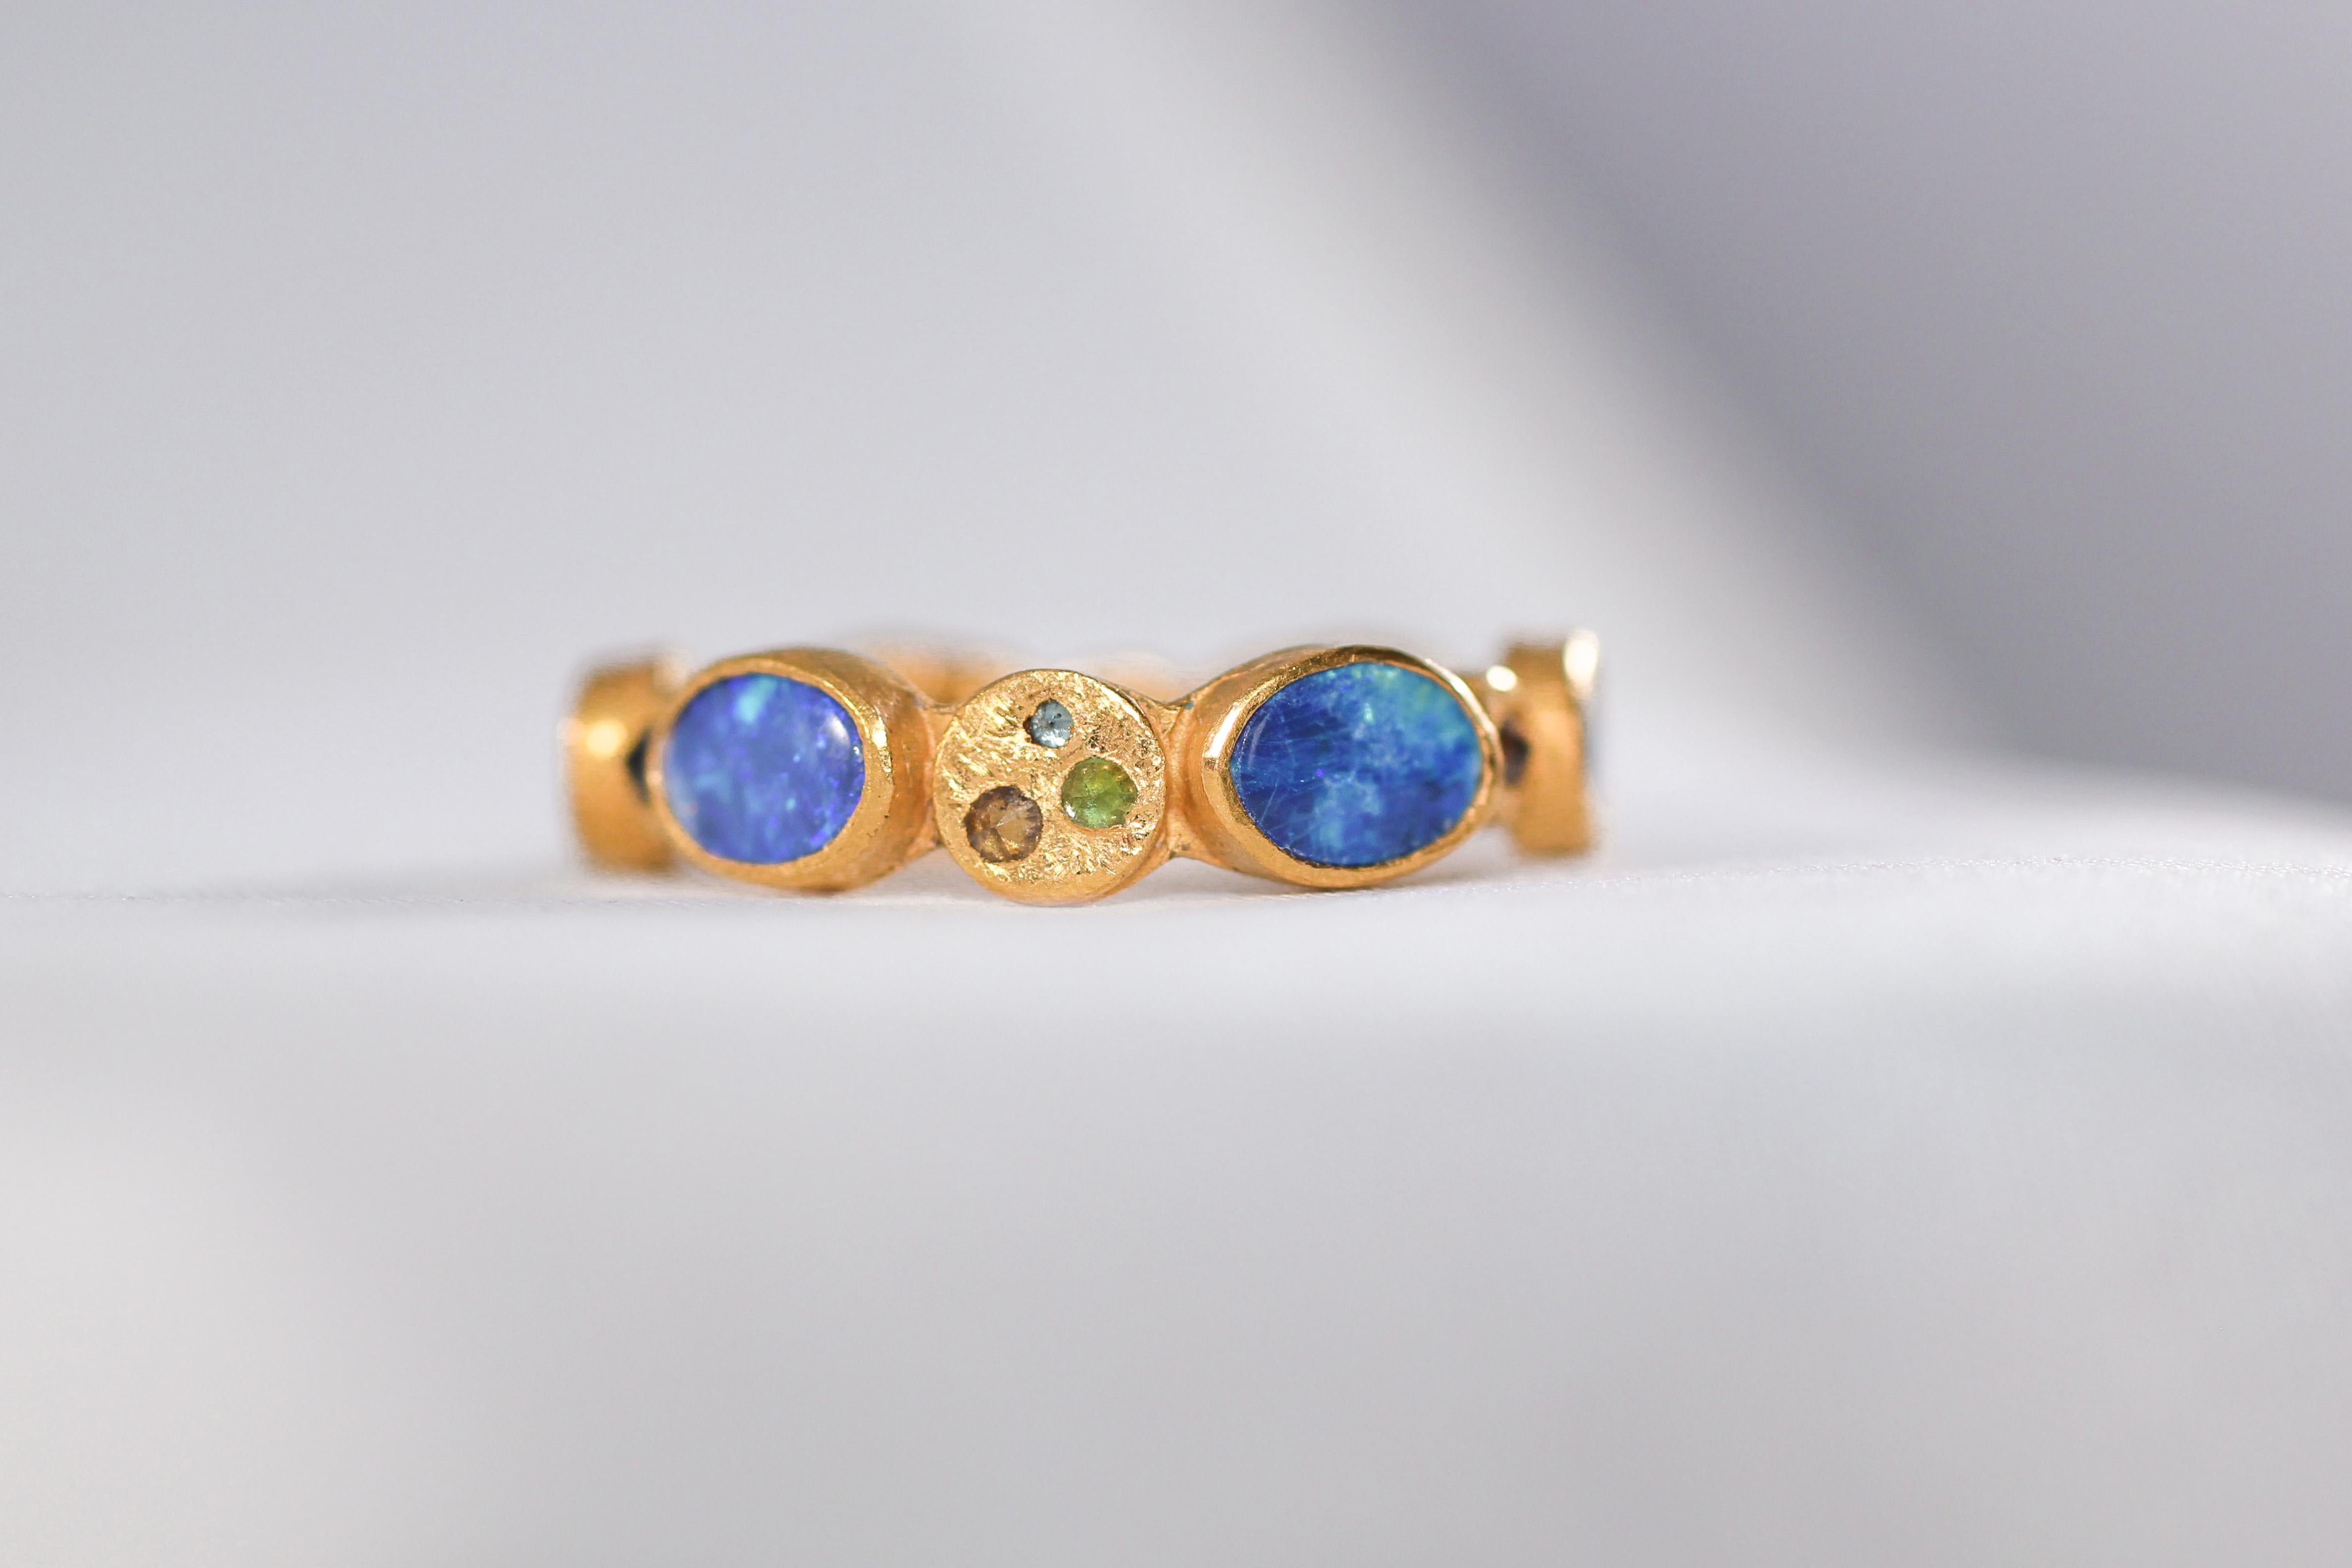 Black Opal Diamonds and Sapphires 22 Karat Gold Band Fashion Ring For Sale 6